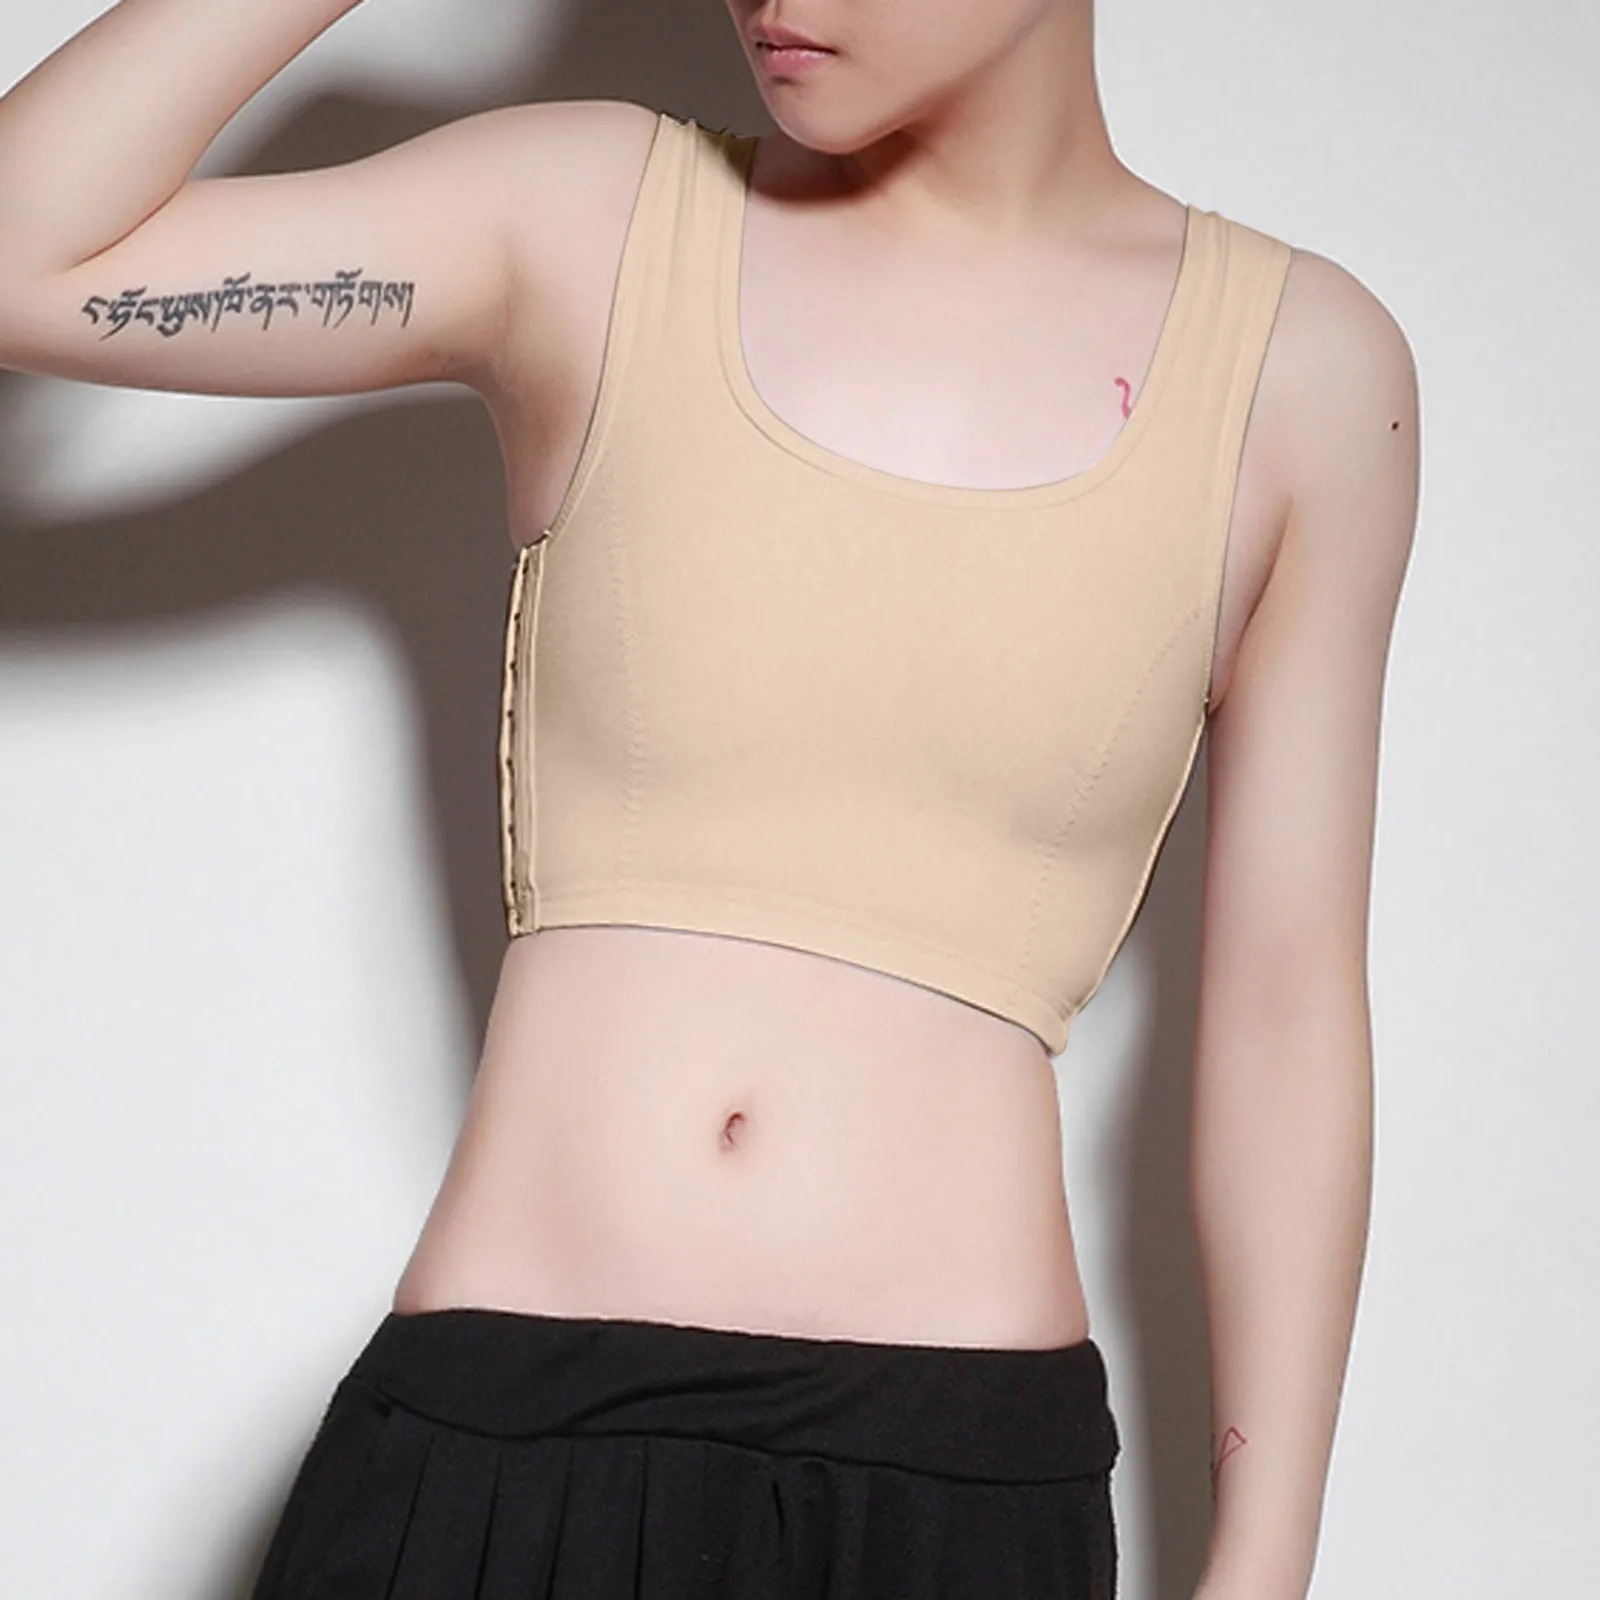 Women Solid Color Breast Side Buckle Short Chest Casual Tran Top Breathable Buckle Tops Casual Vest Breast Binder Tops Shapers plus size shapewear